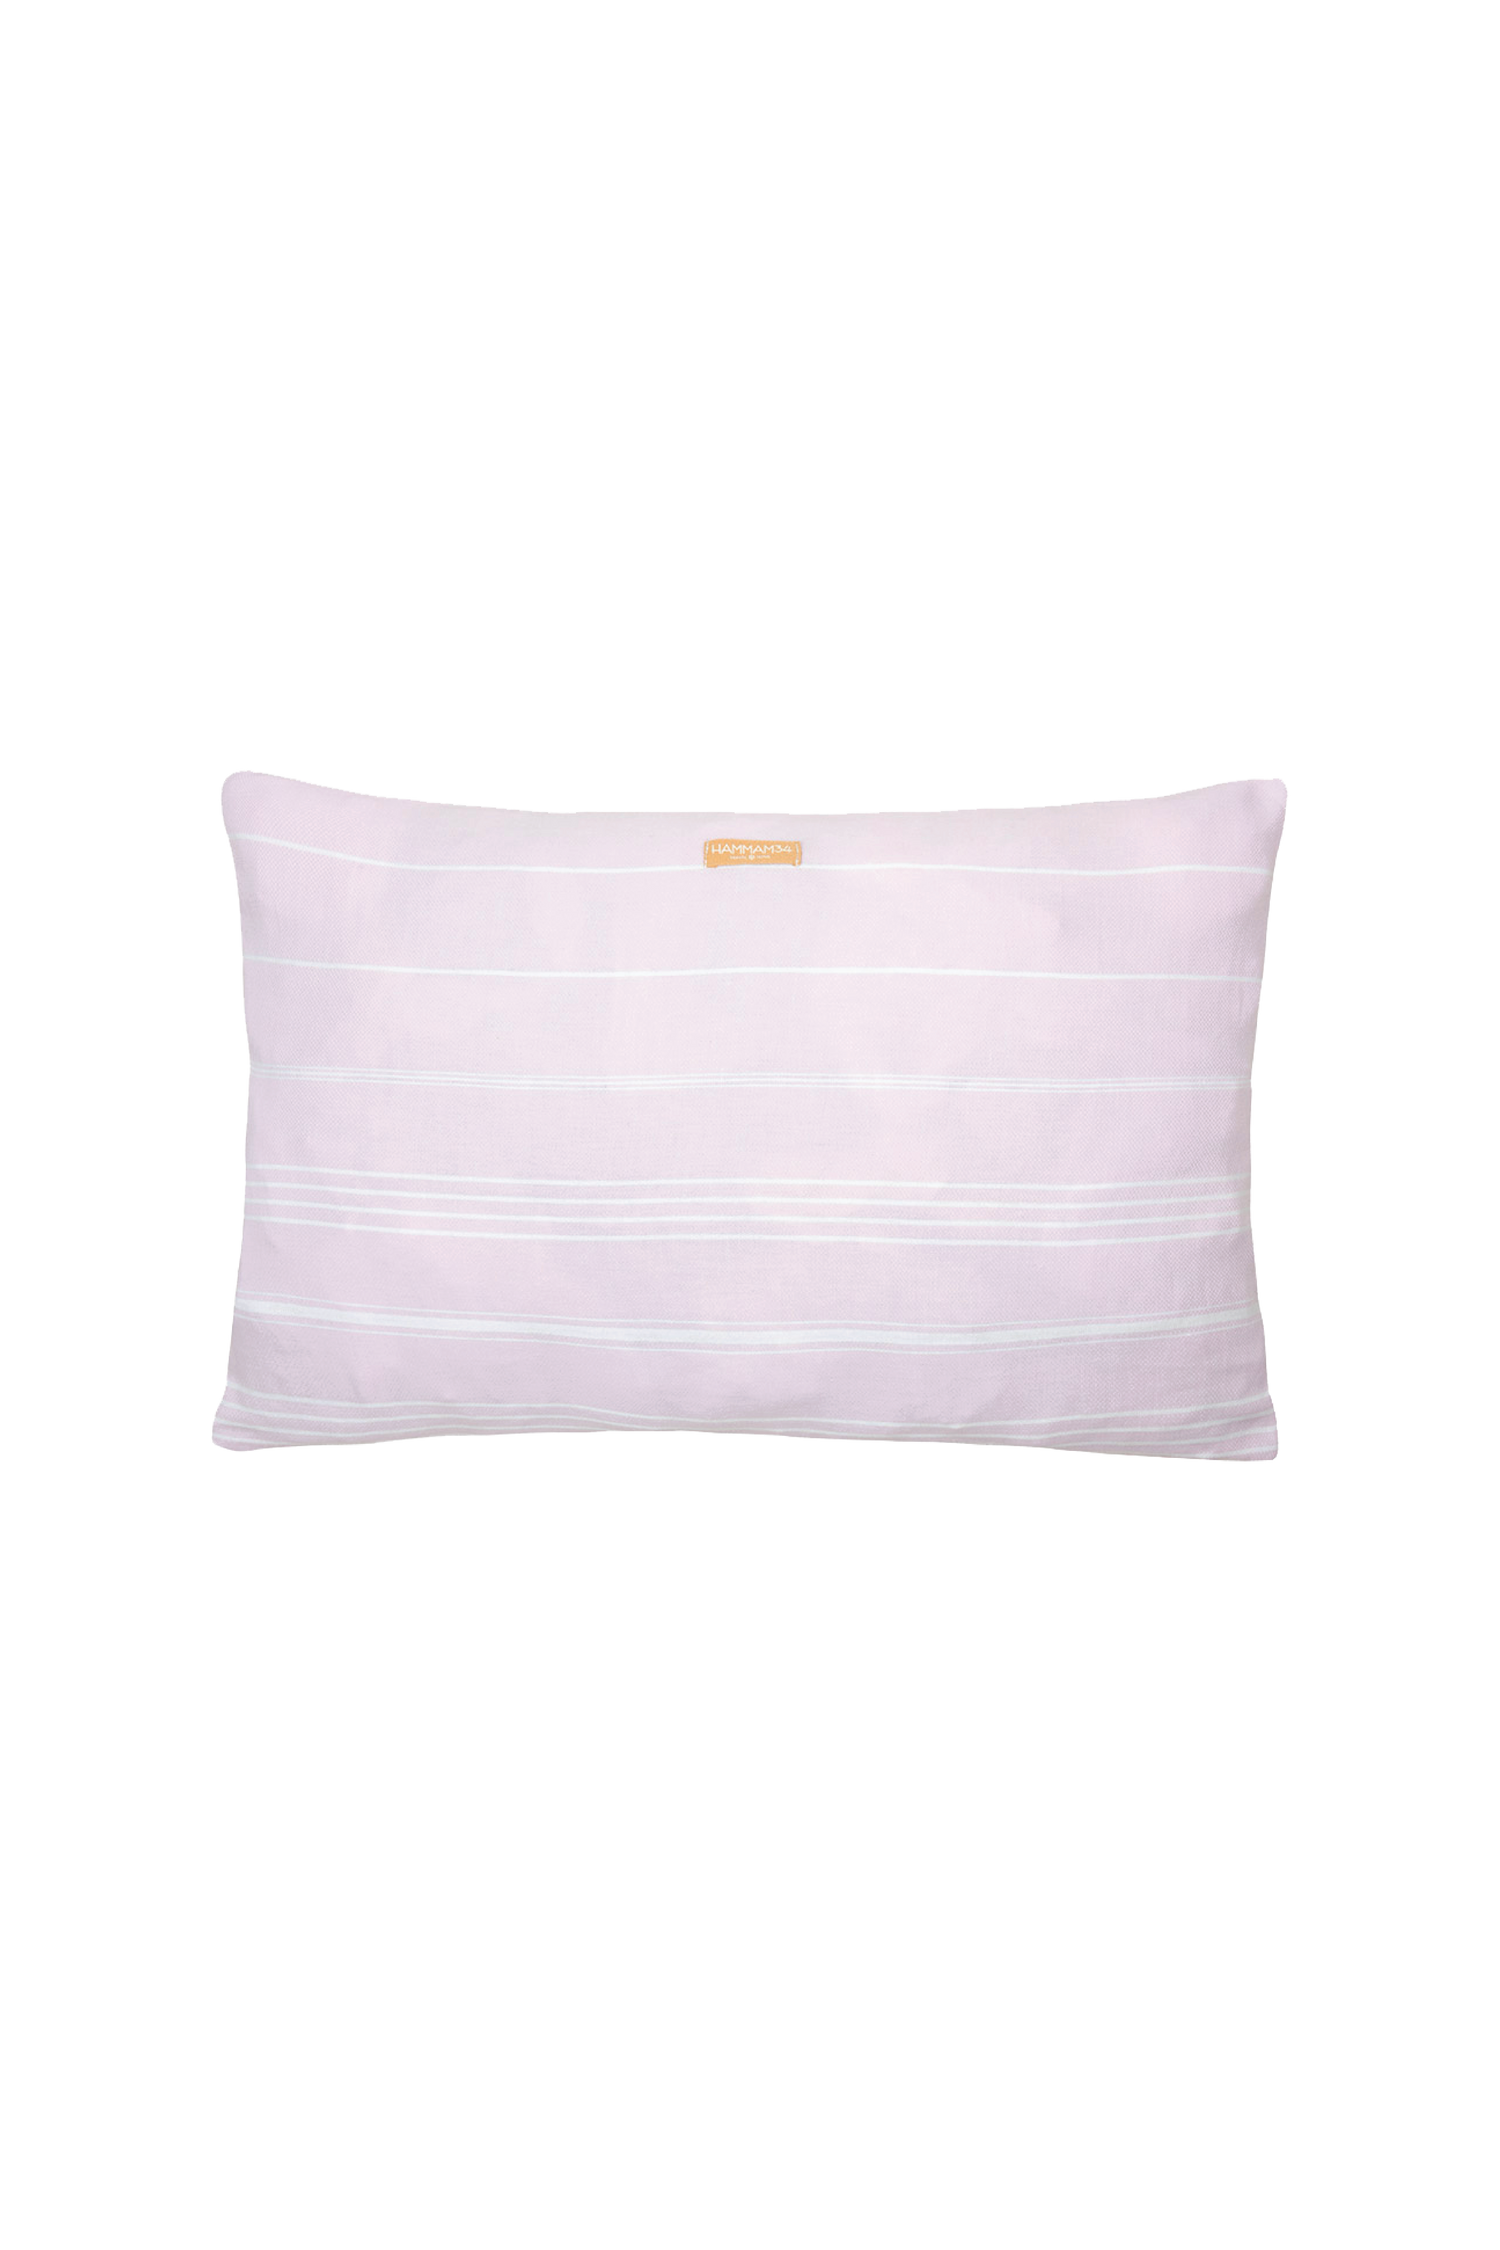 Hammam34 Pink Pillow Case with Stripes